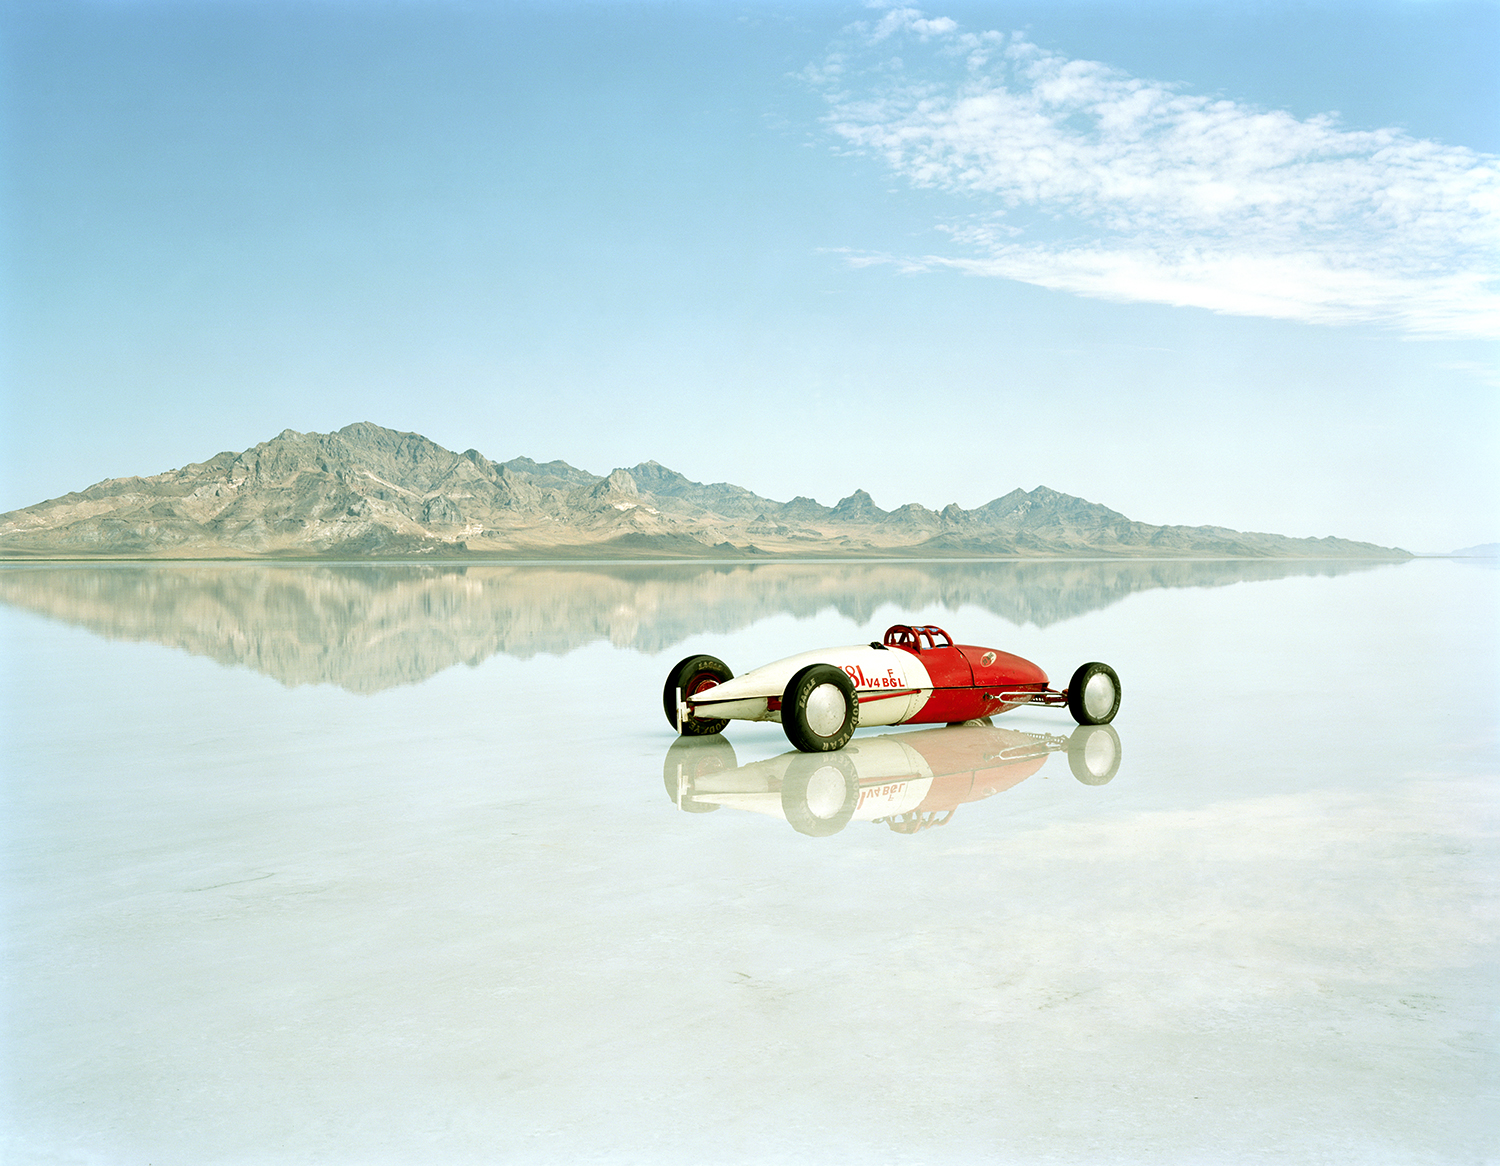 A lone racing car stands in a salt flat with mountains in the distance